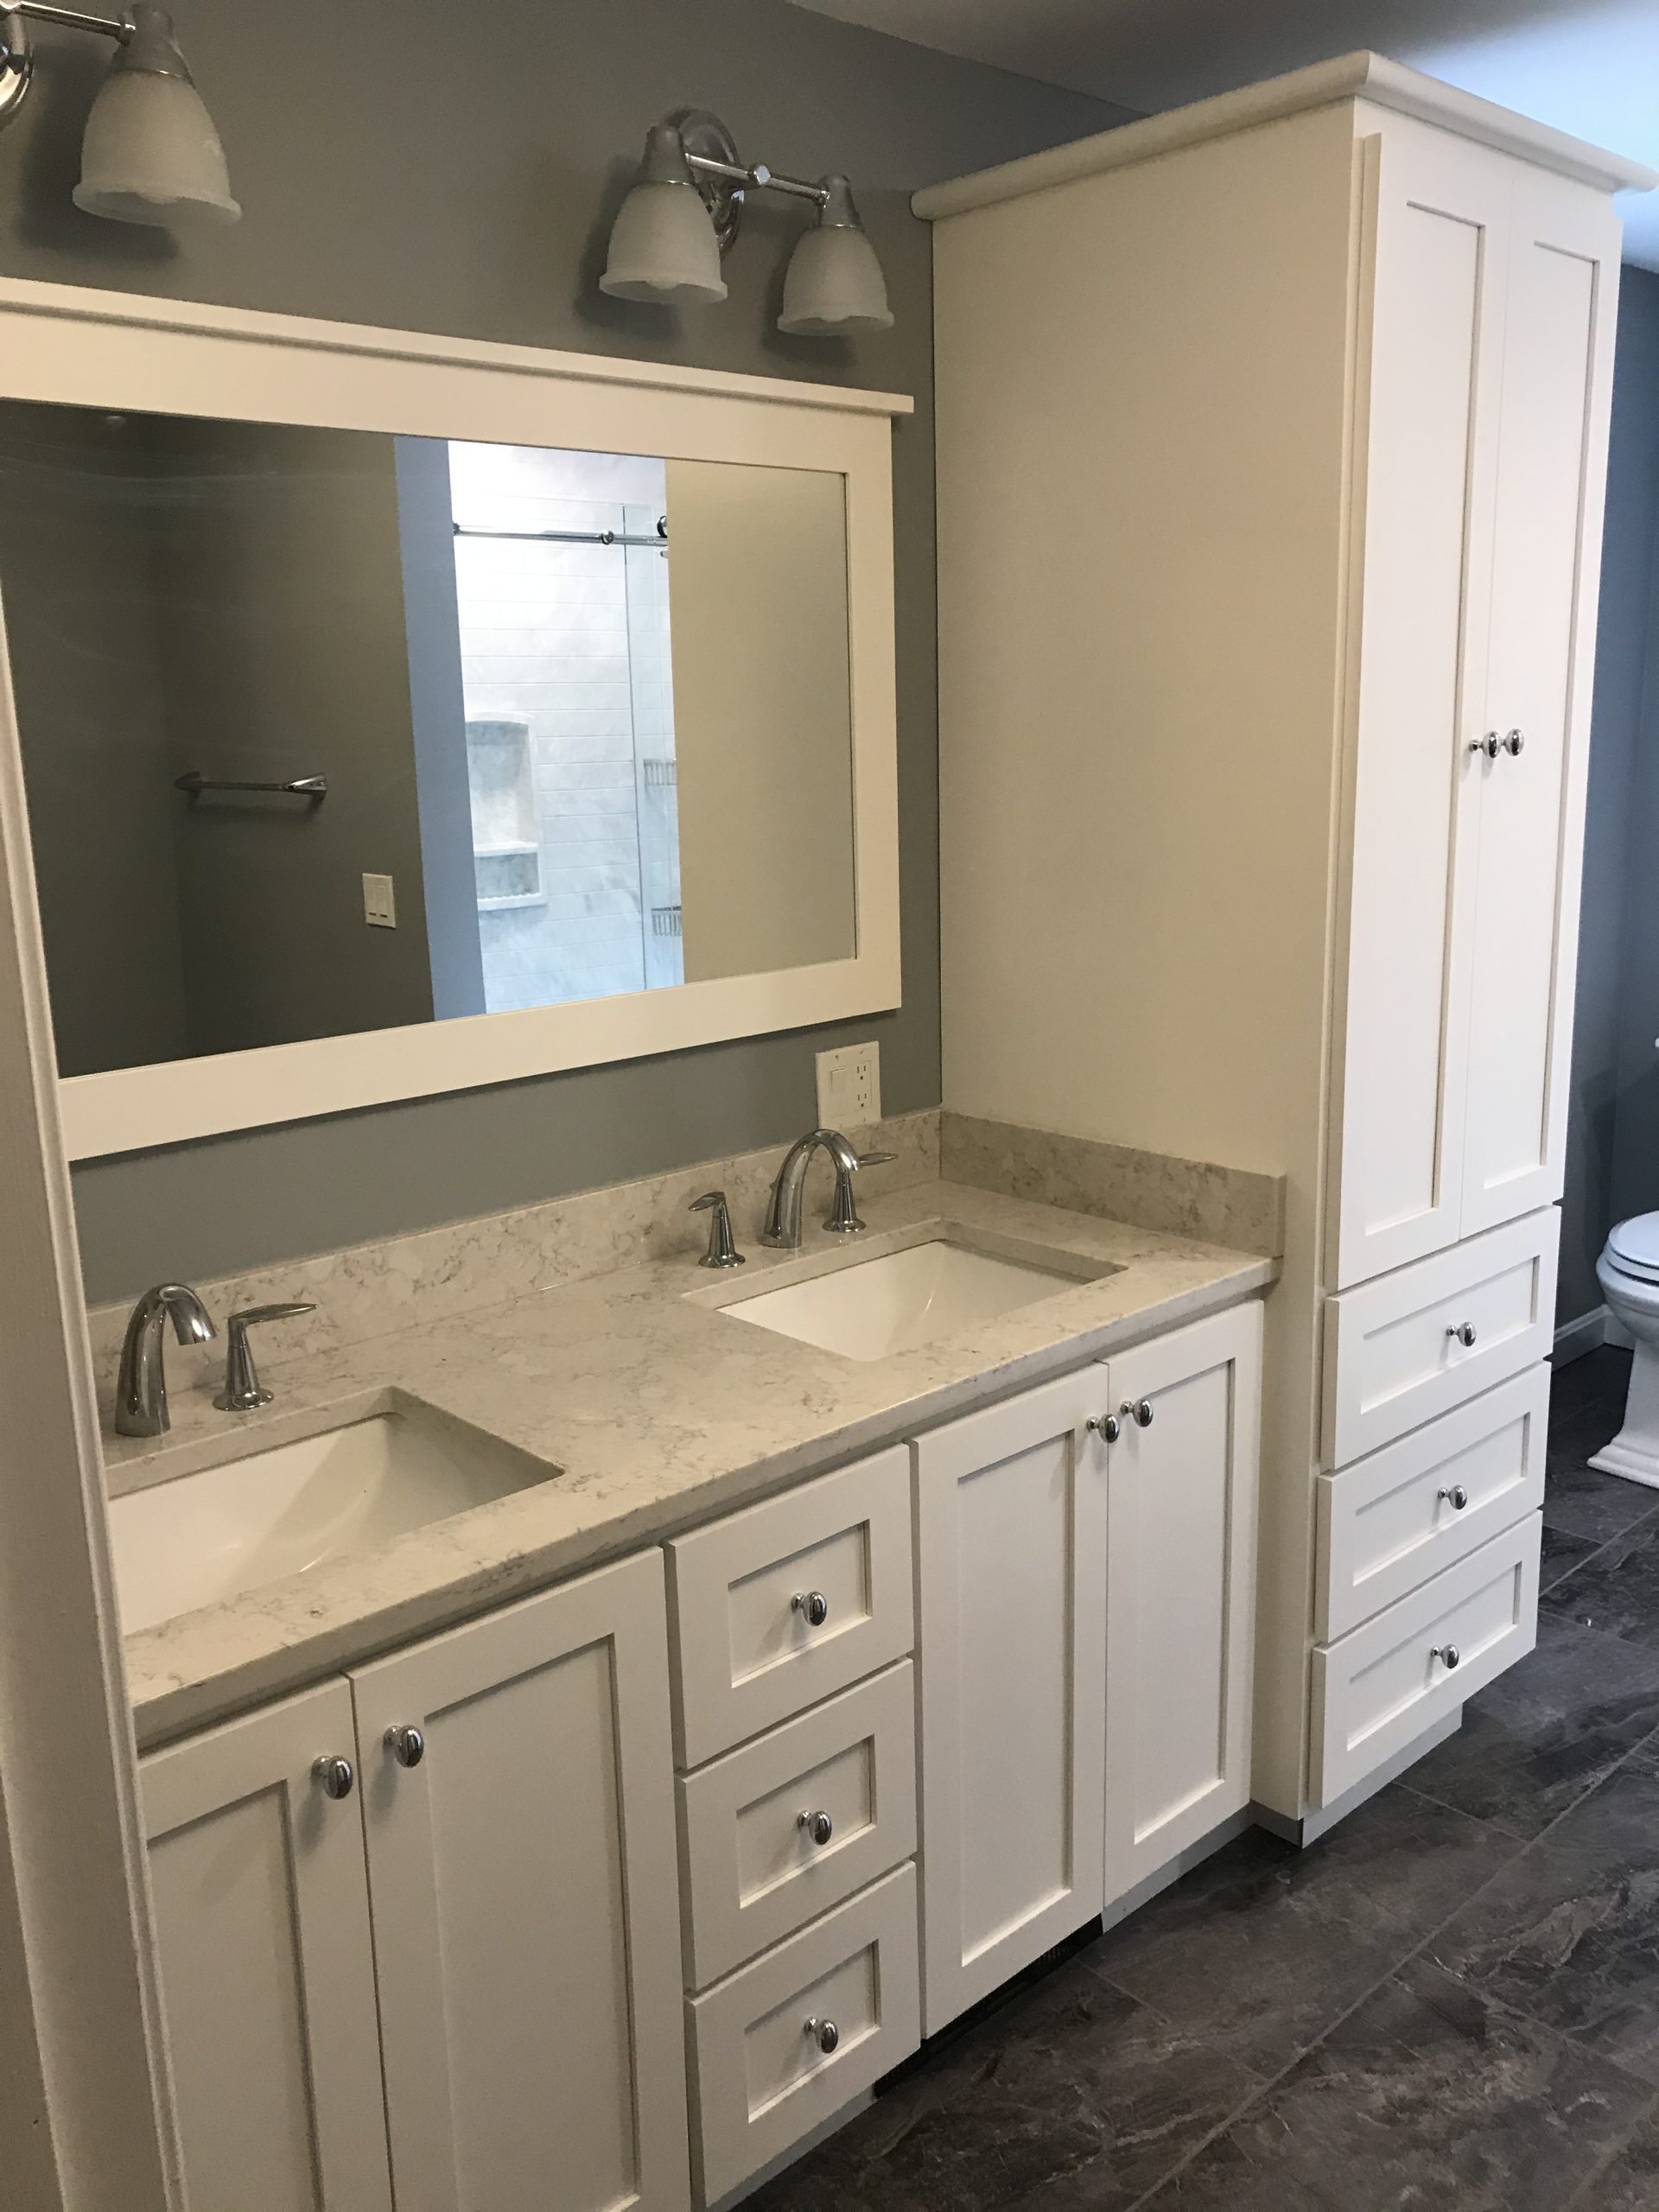 60″ Bathroom Vanity (With add’l upgrades available)